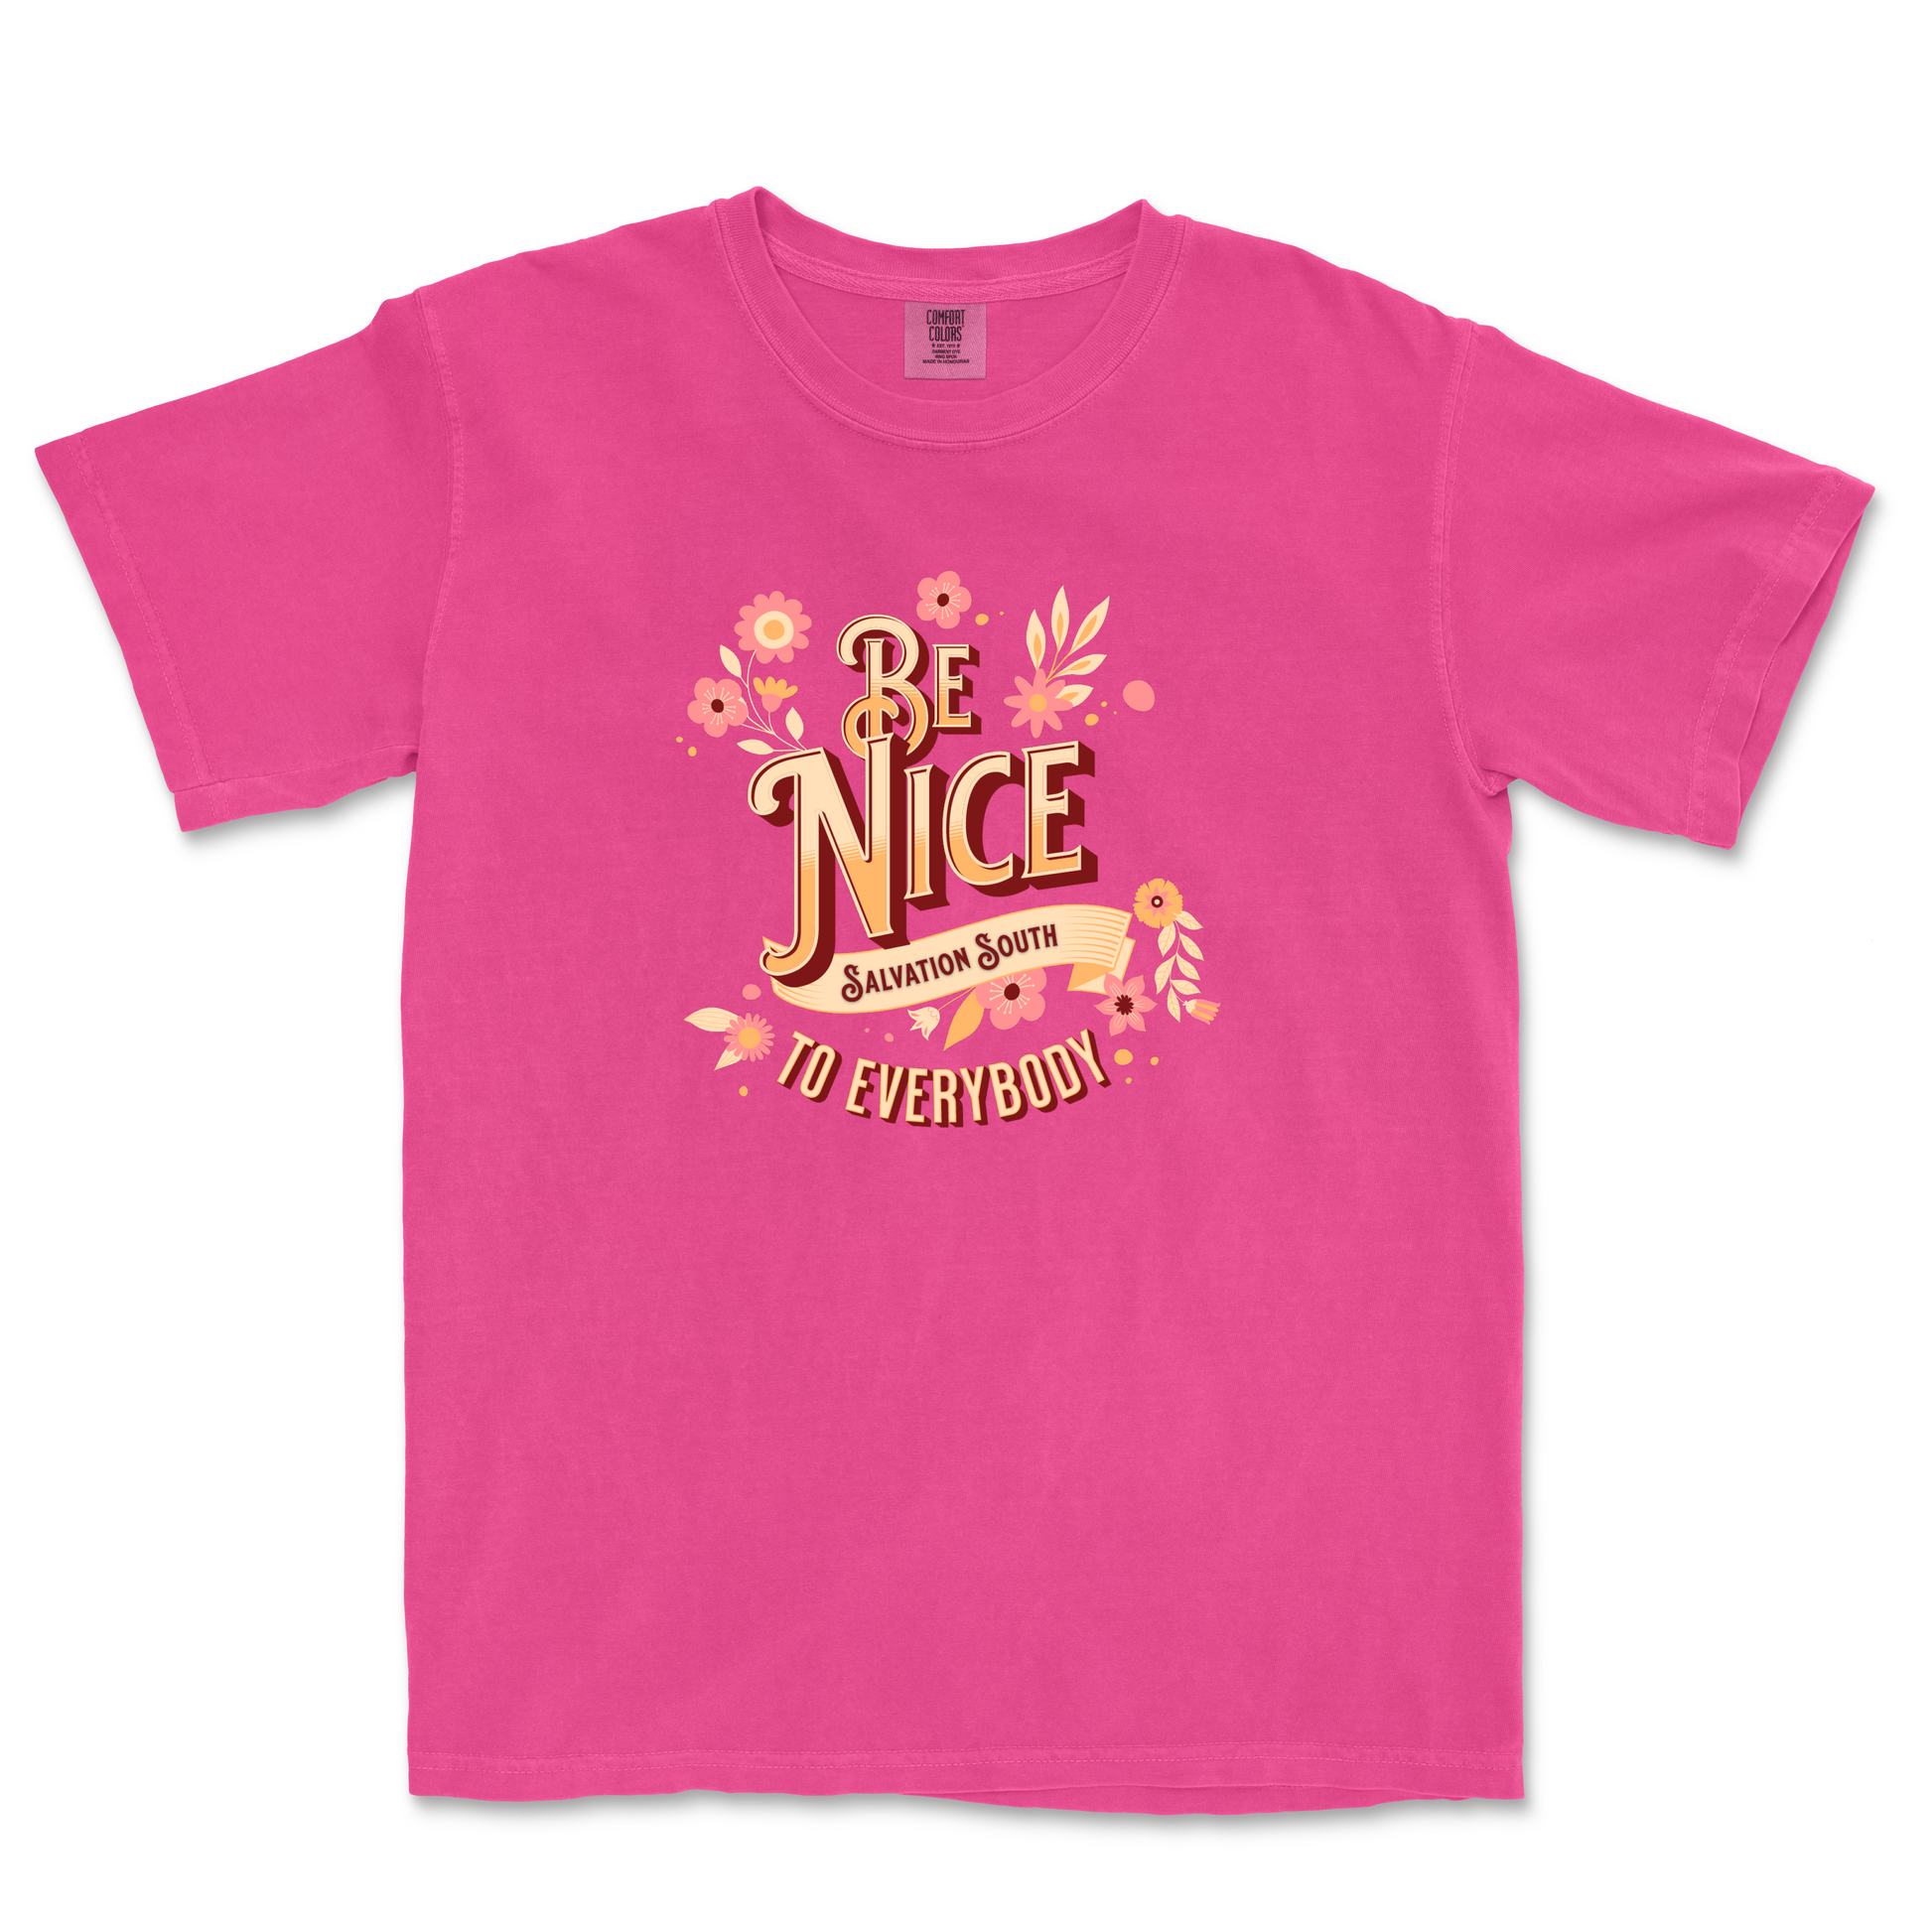 Salvation South - The Be Nice To Everybody T-shirt - Pink